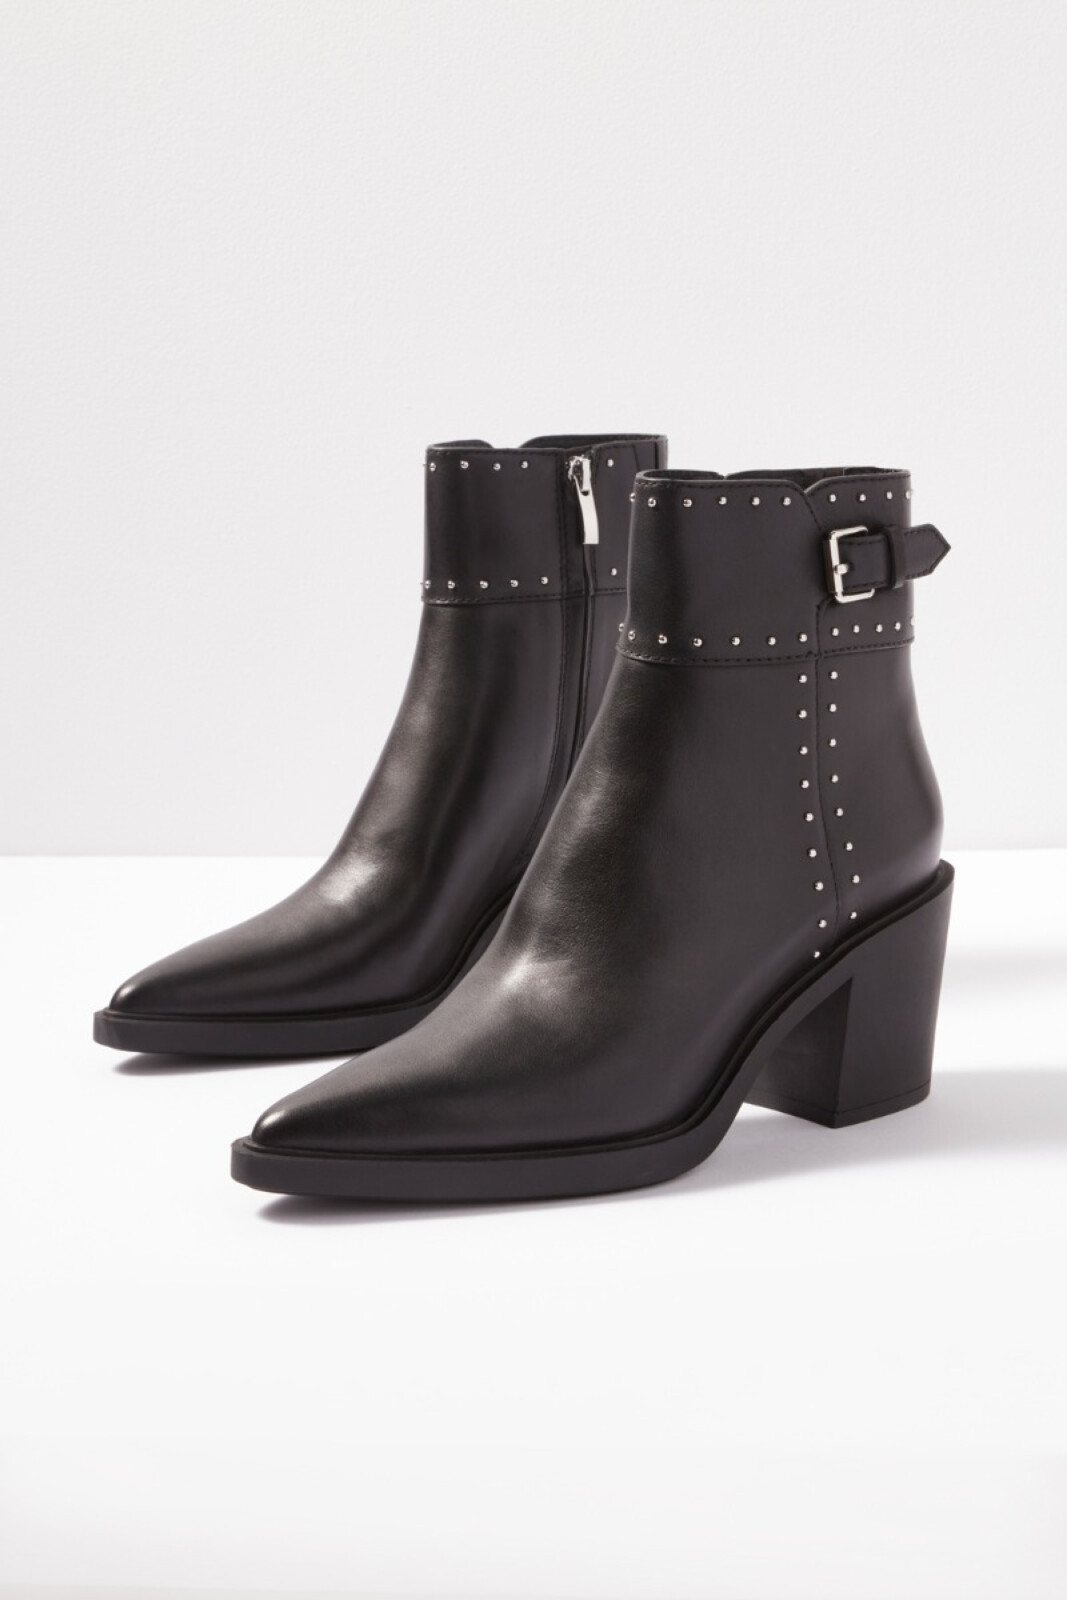 PAIGE Giselle Studded Bootie | EVEREVE